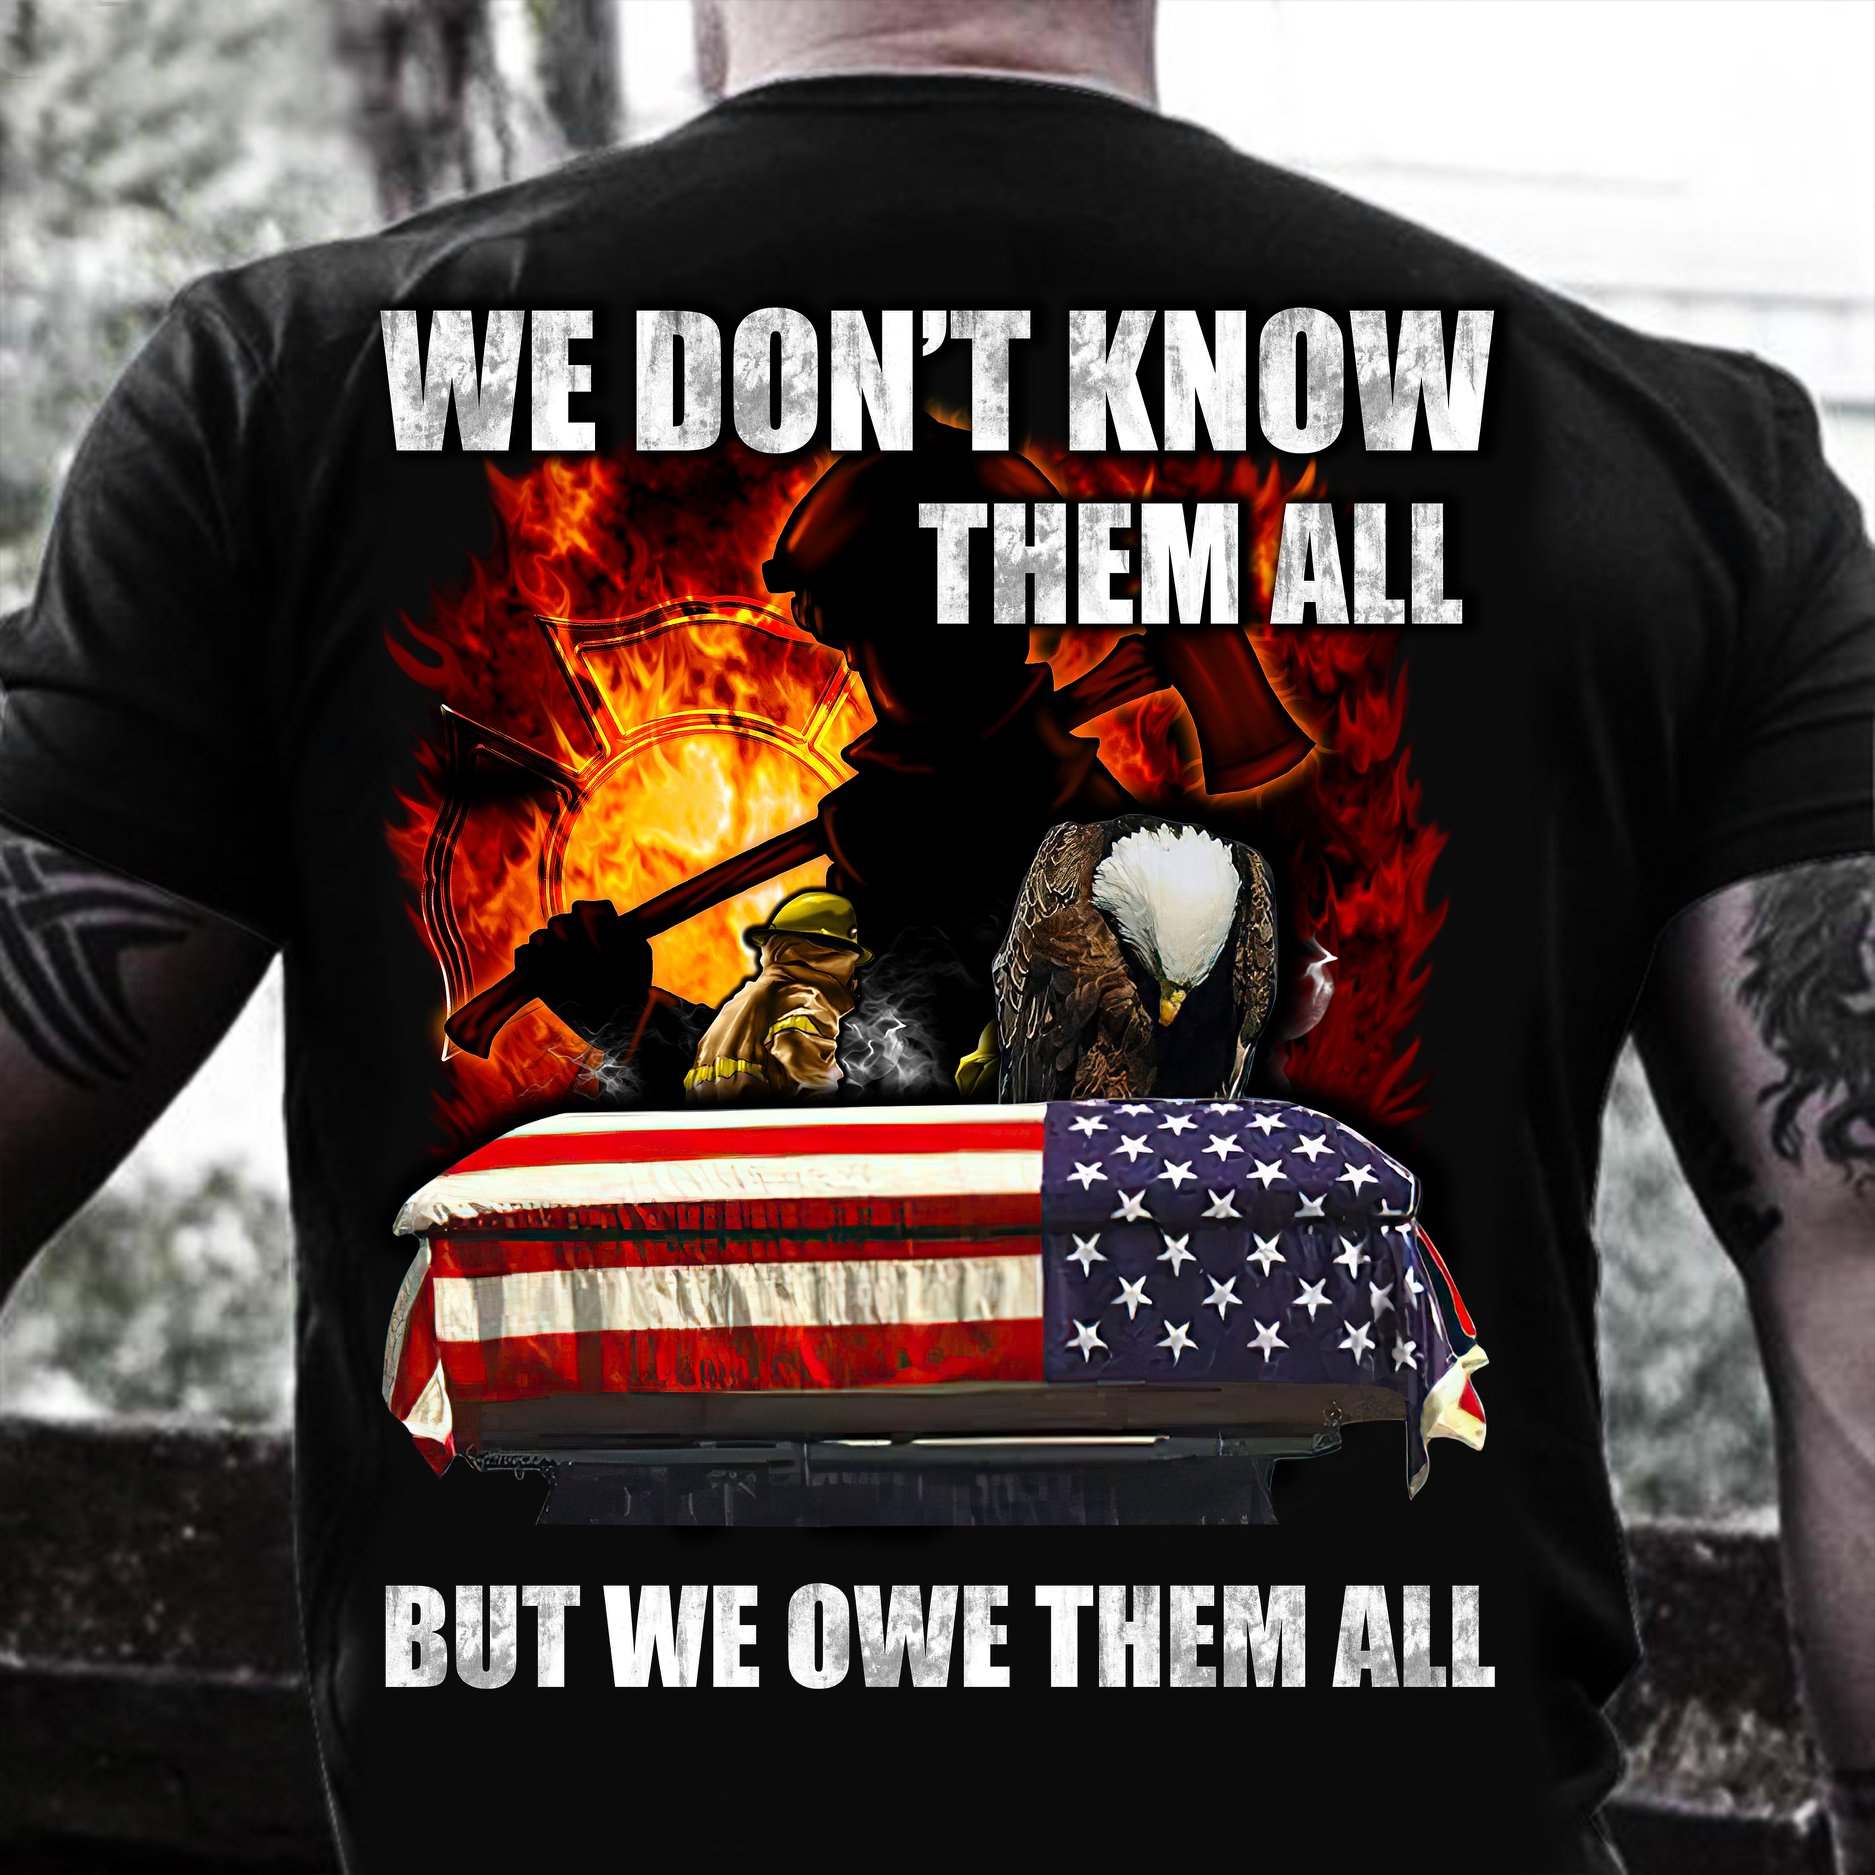 We don't know them all but we owe them all - America flag, American firefighter